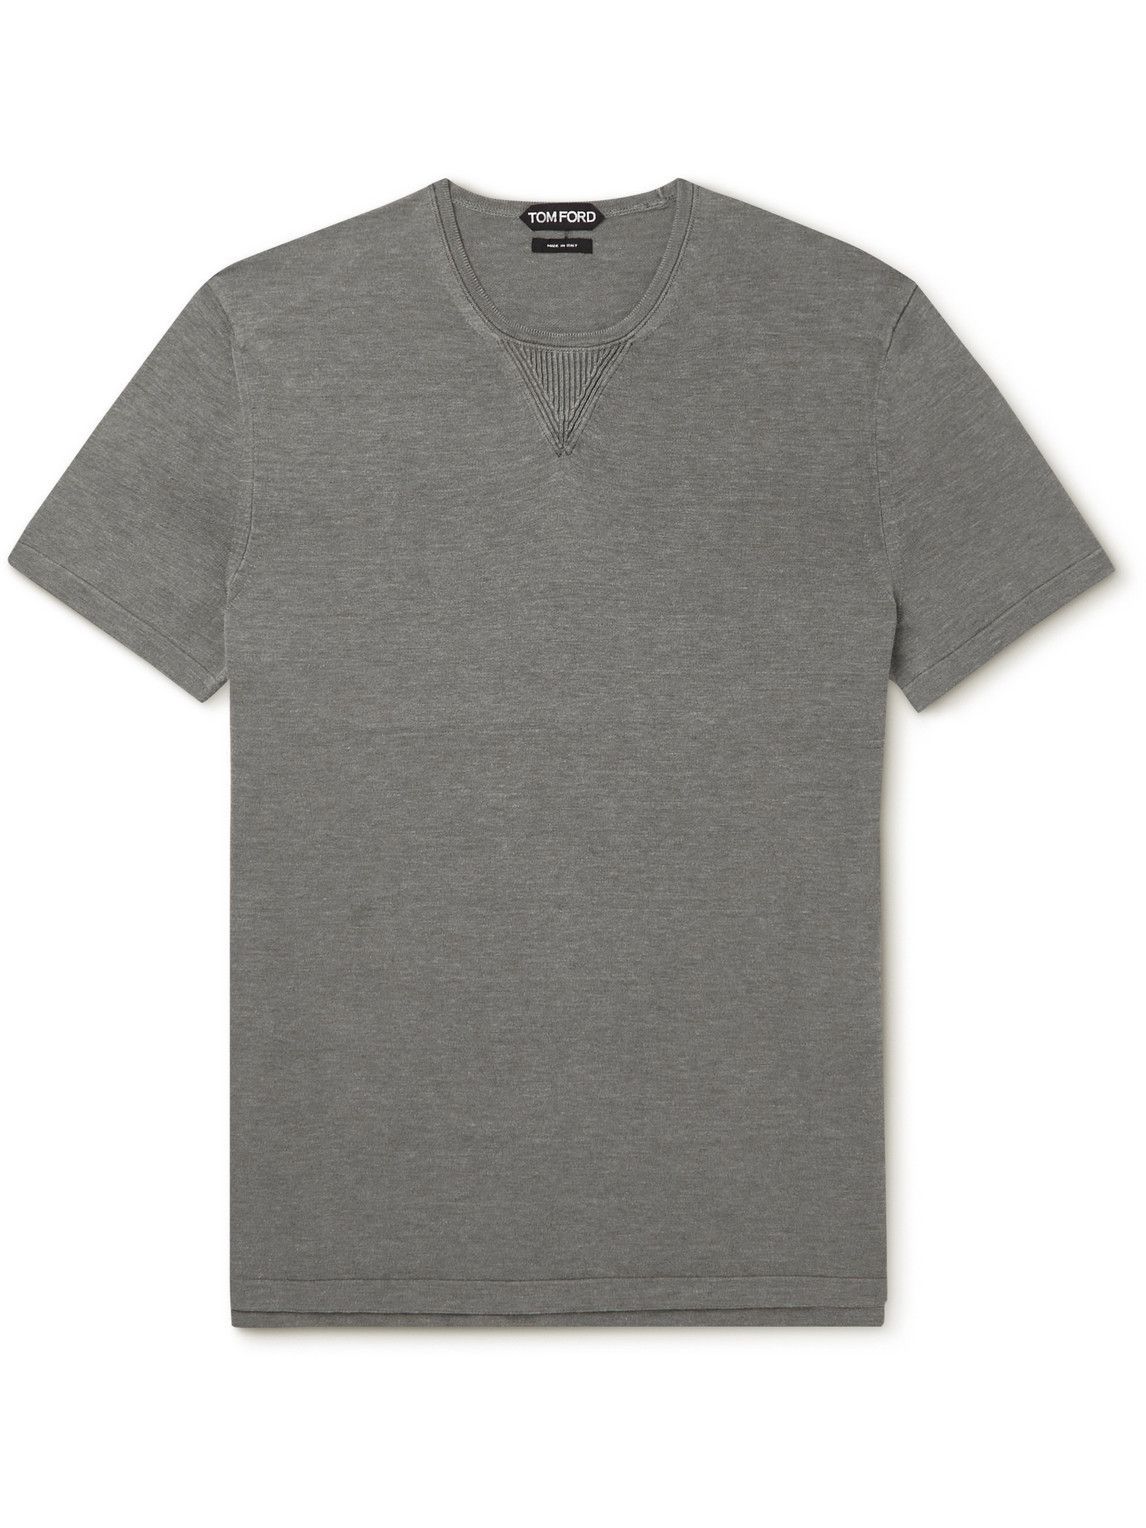 TOM FORD - Silk and Cotton-Blend T-Shirt - Gray TOM FORD